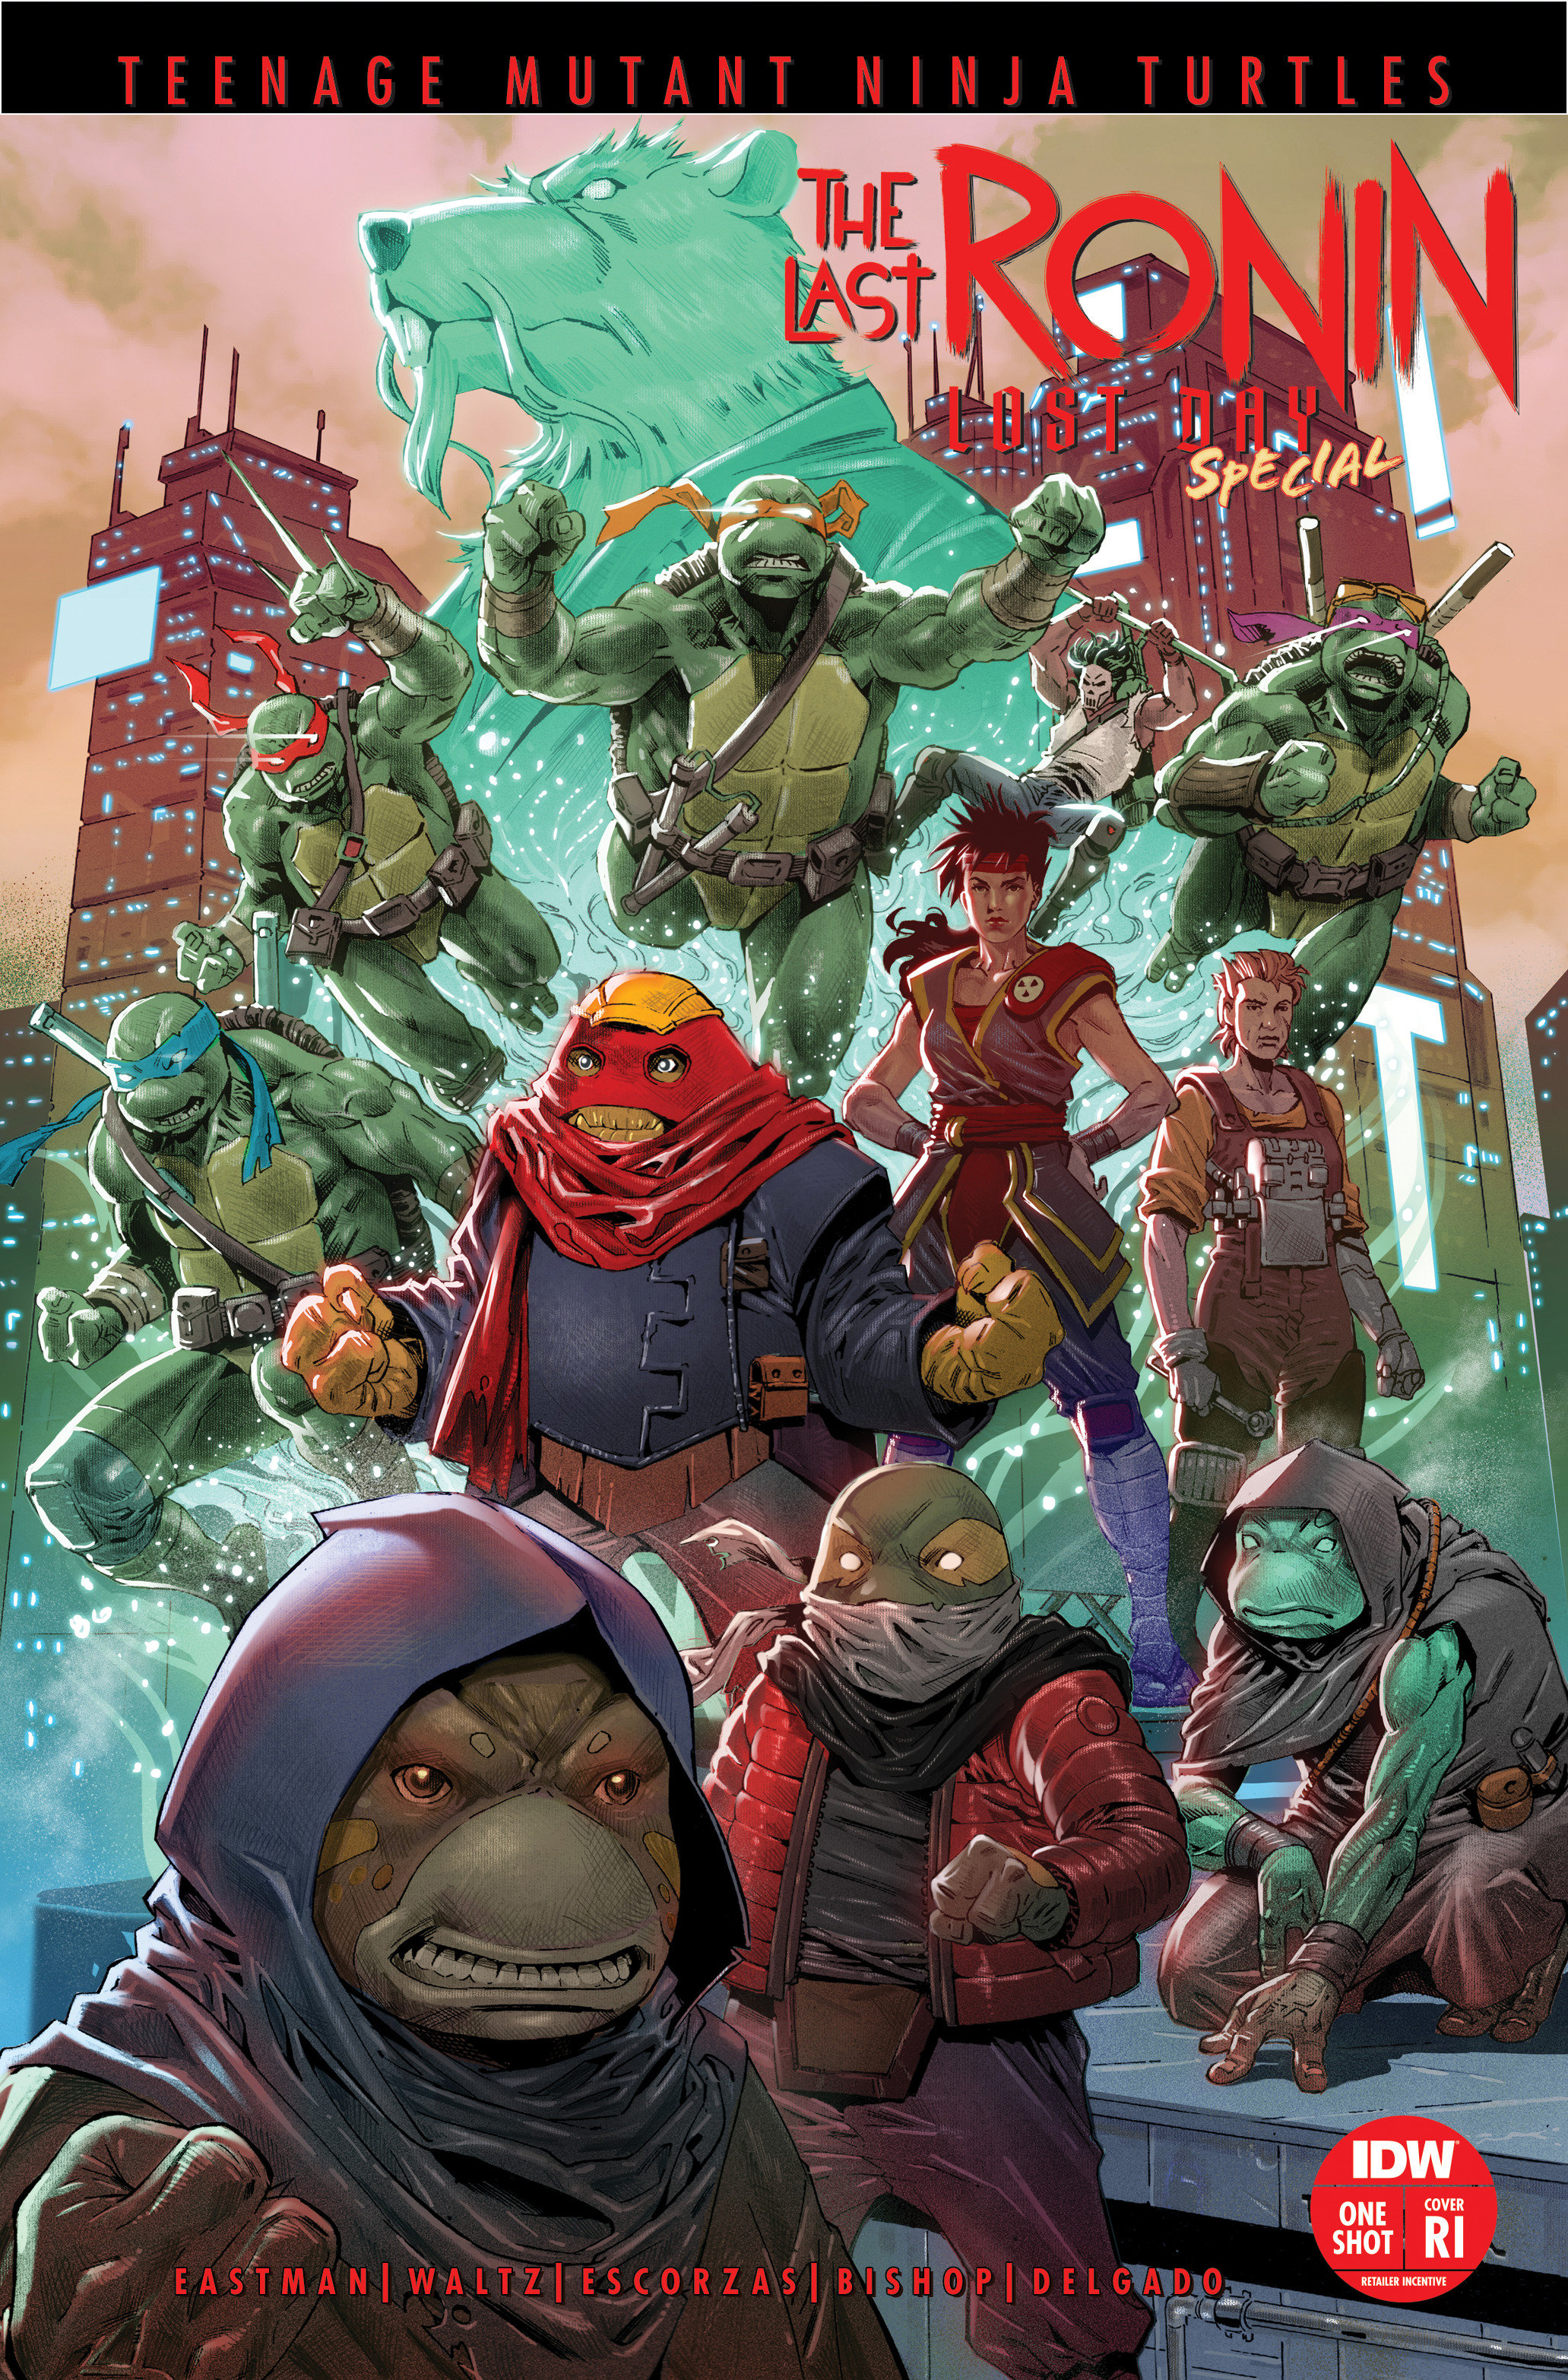 Teenage Mutant Ninja Turtles Last Ronin Lost Day Special Cover D 1 for 25 Incentive Escorzas